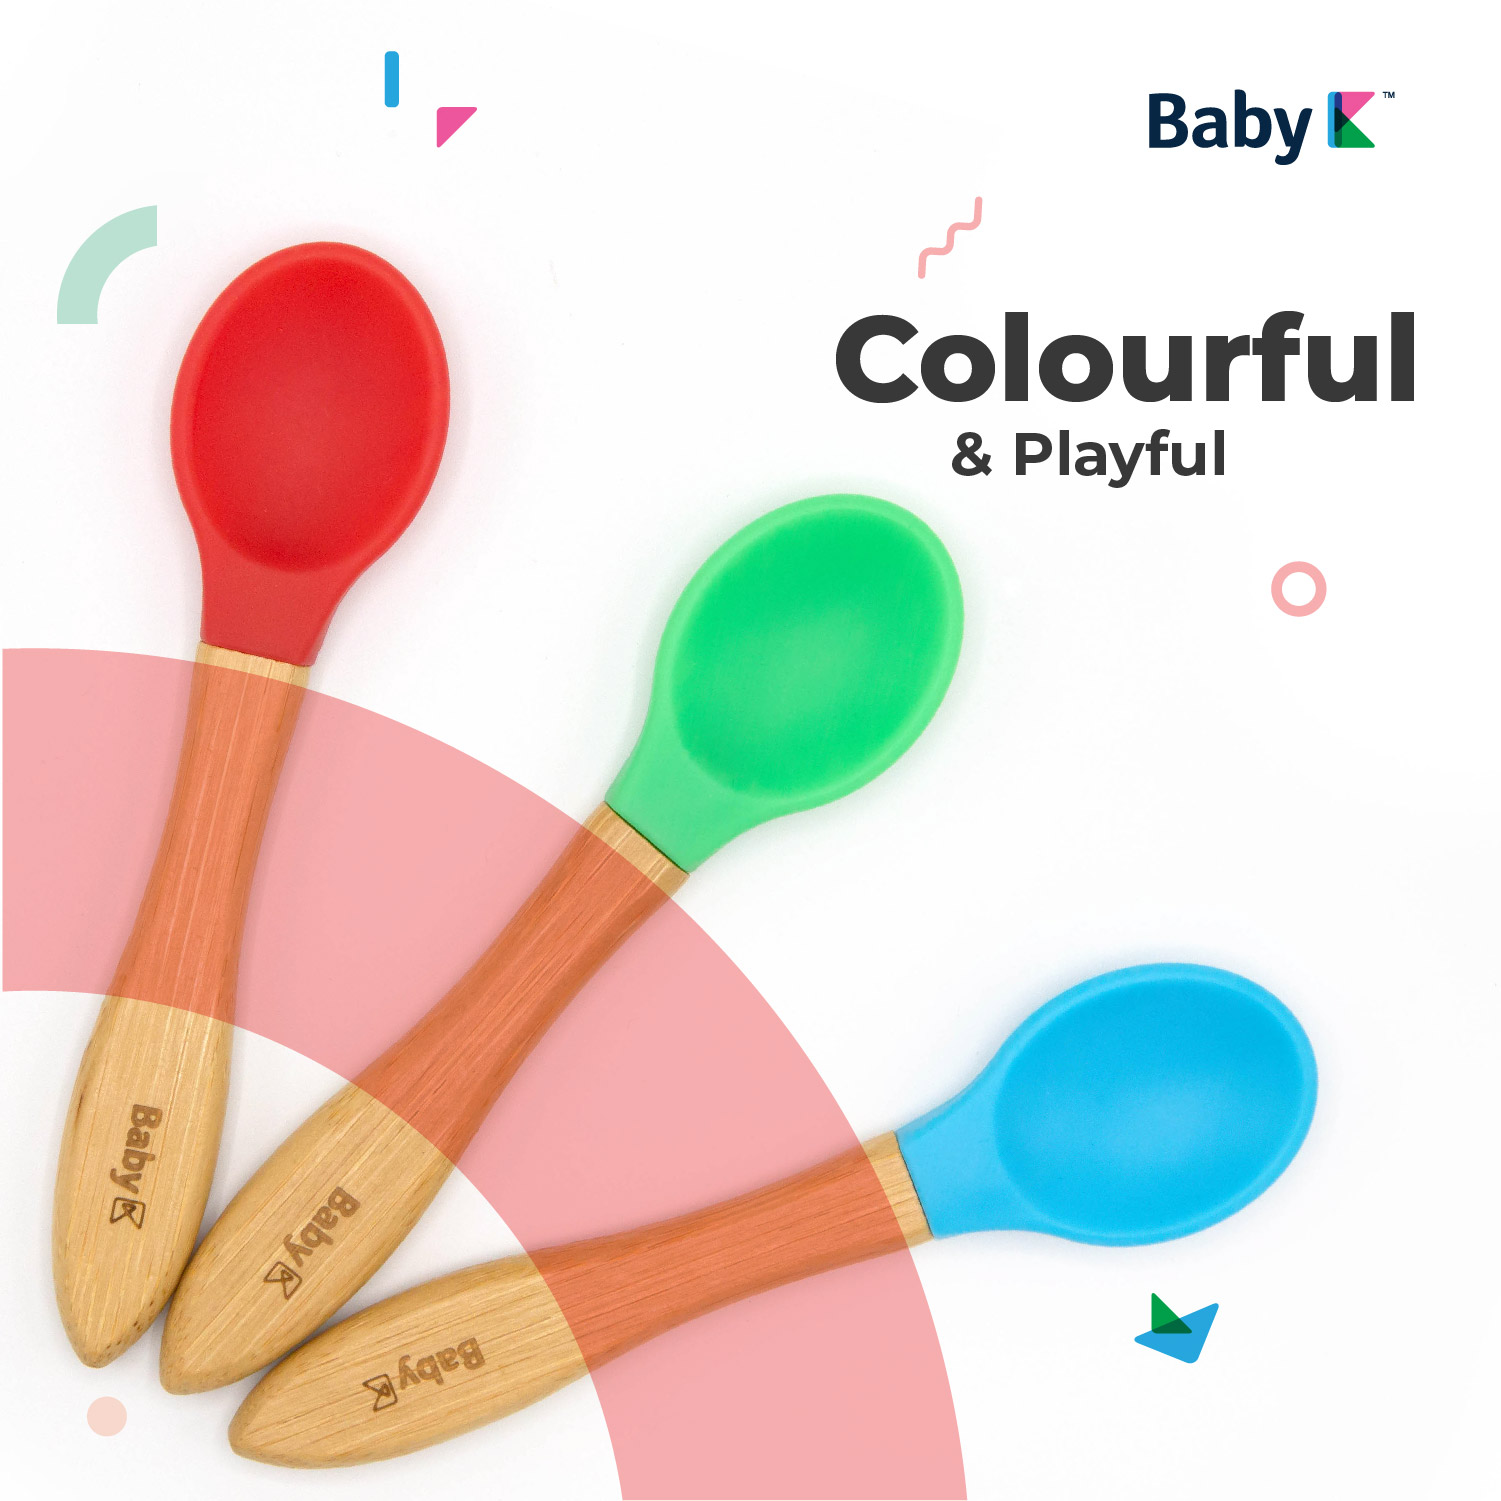 https://babyk.co/wp-content/uploads/2023/04/Listing_BambooSpoon-normal-version_05_Colourful.jpg